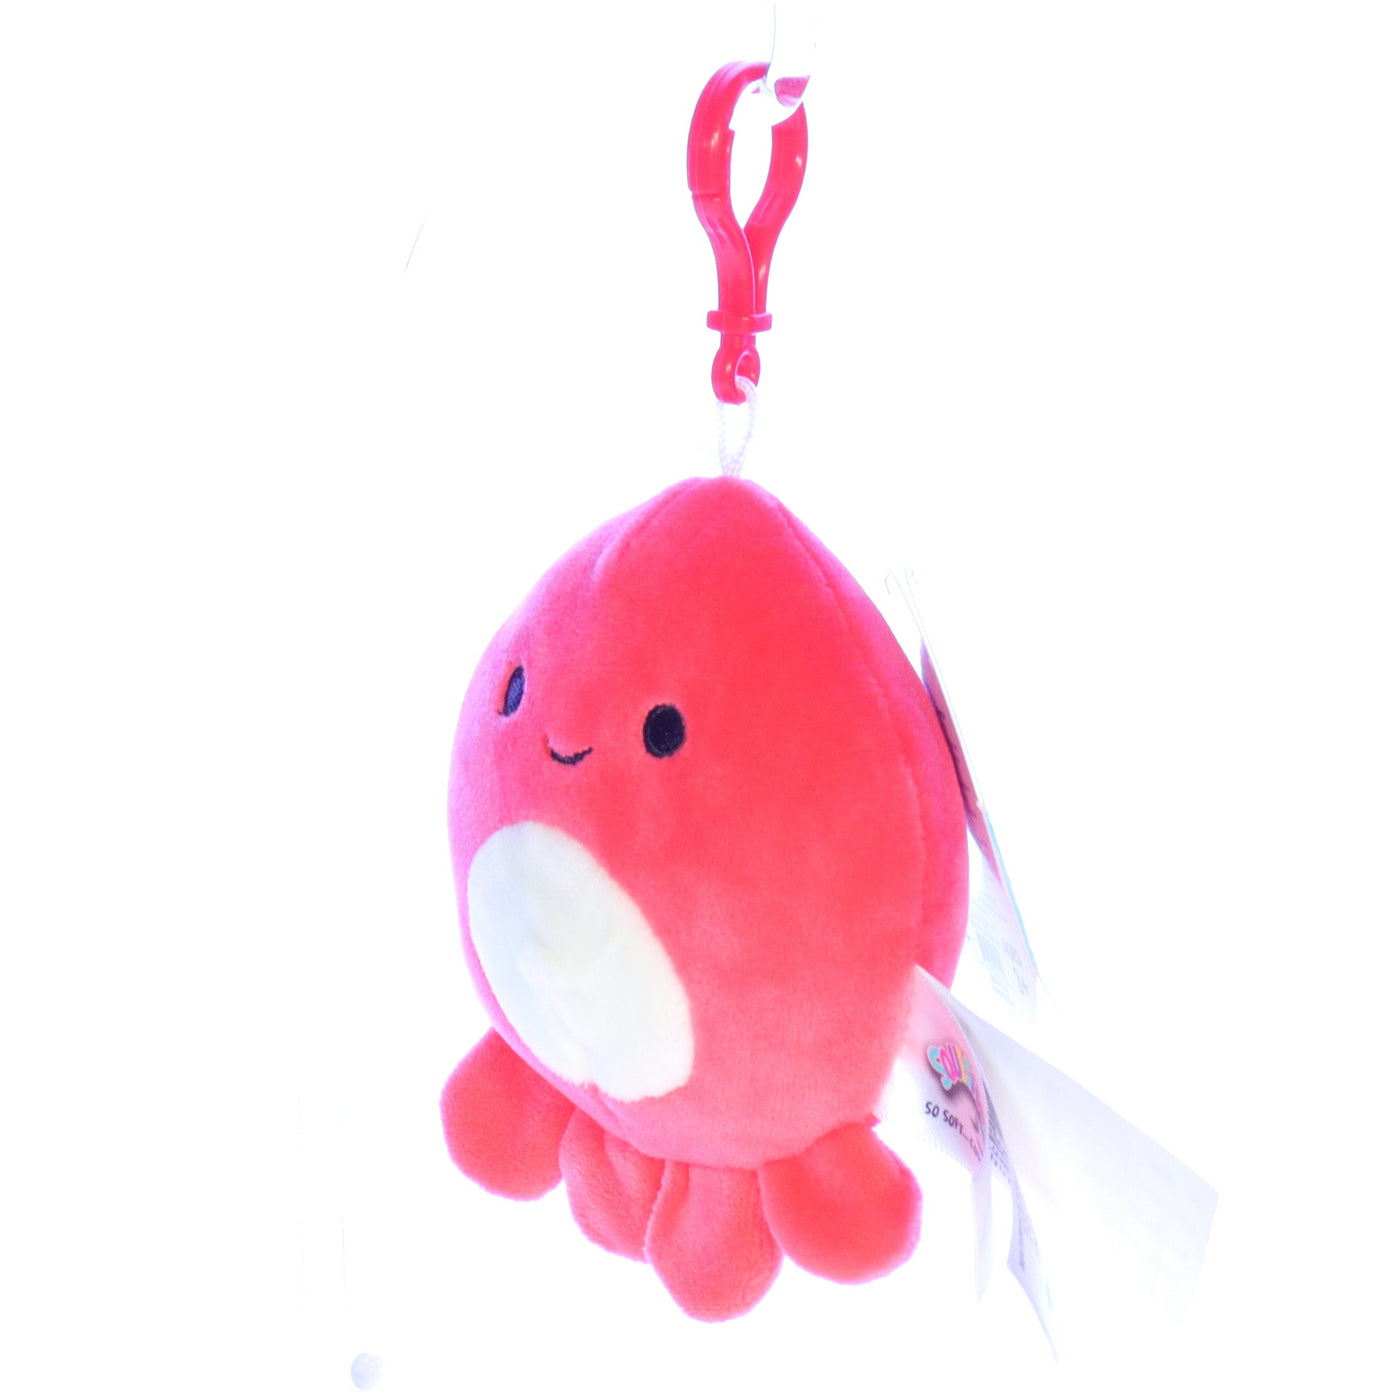 Squishmallows_Q044_Veronica_Keychain_Octopus_Stuffed_Animal_2019 Front Left View